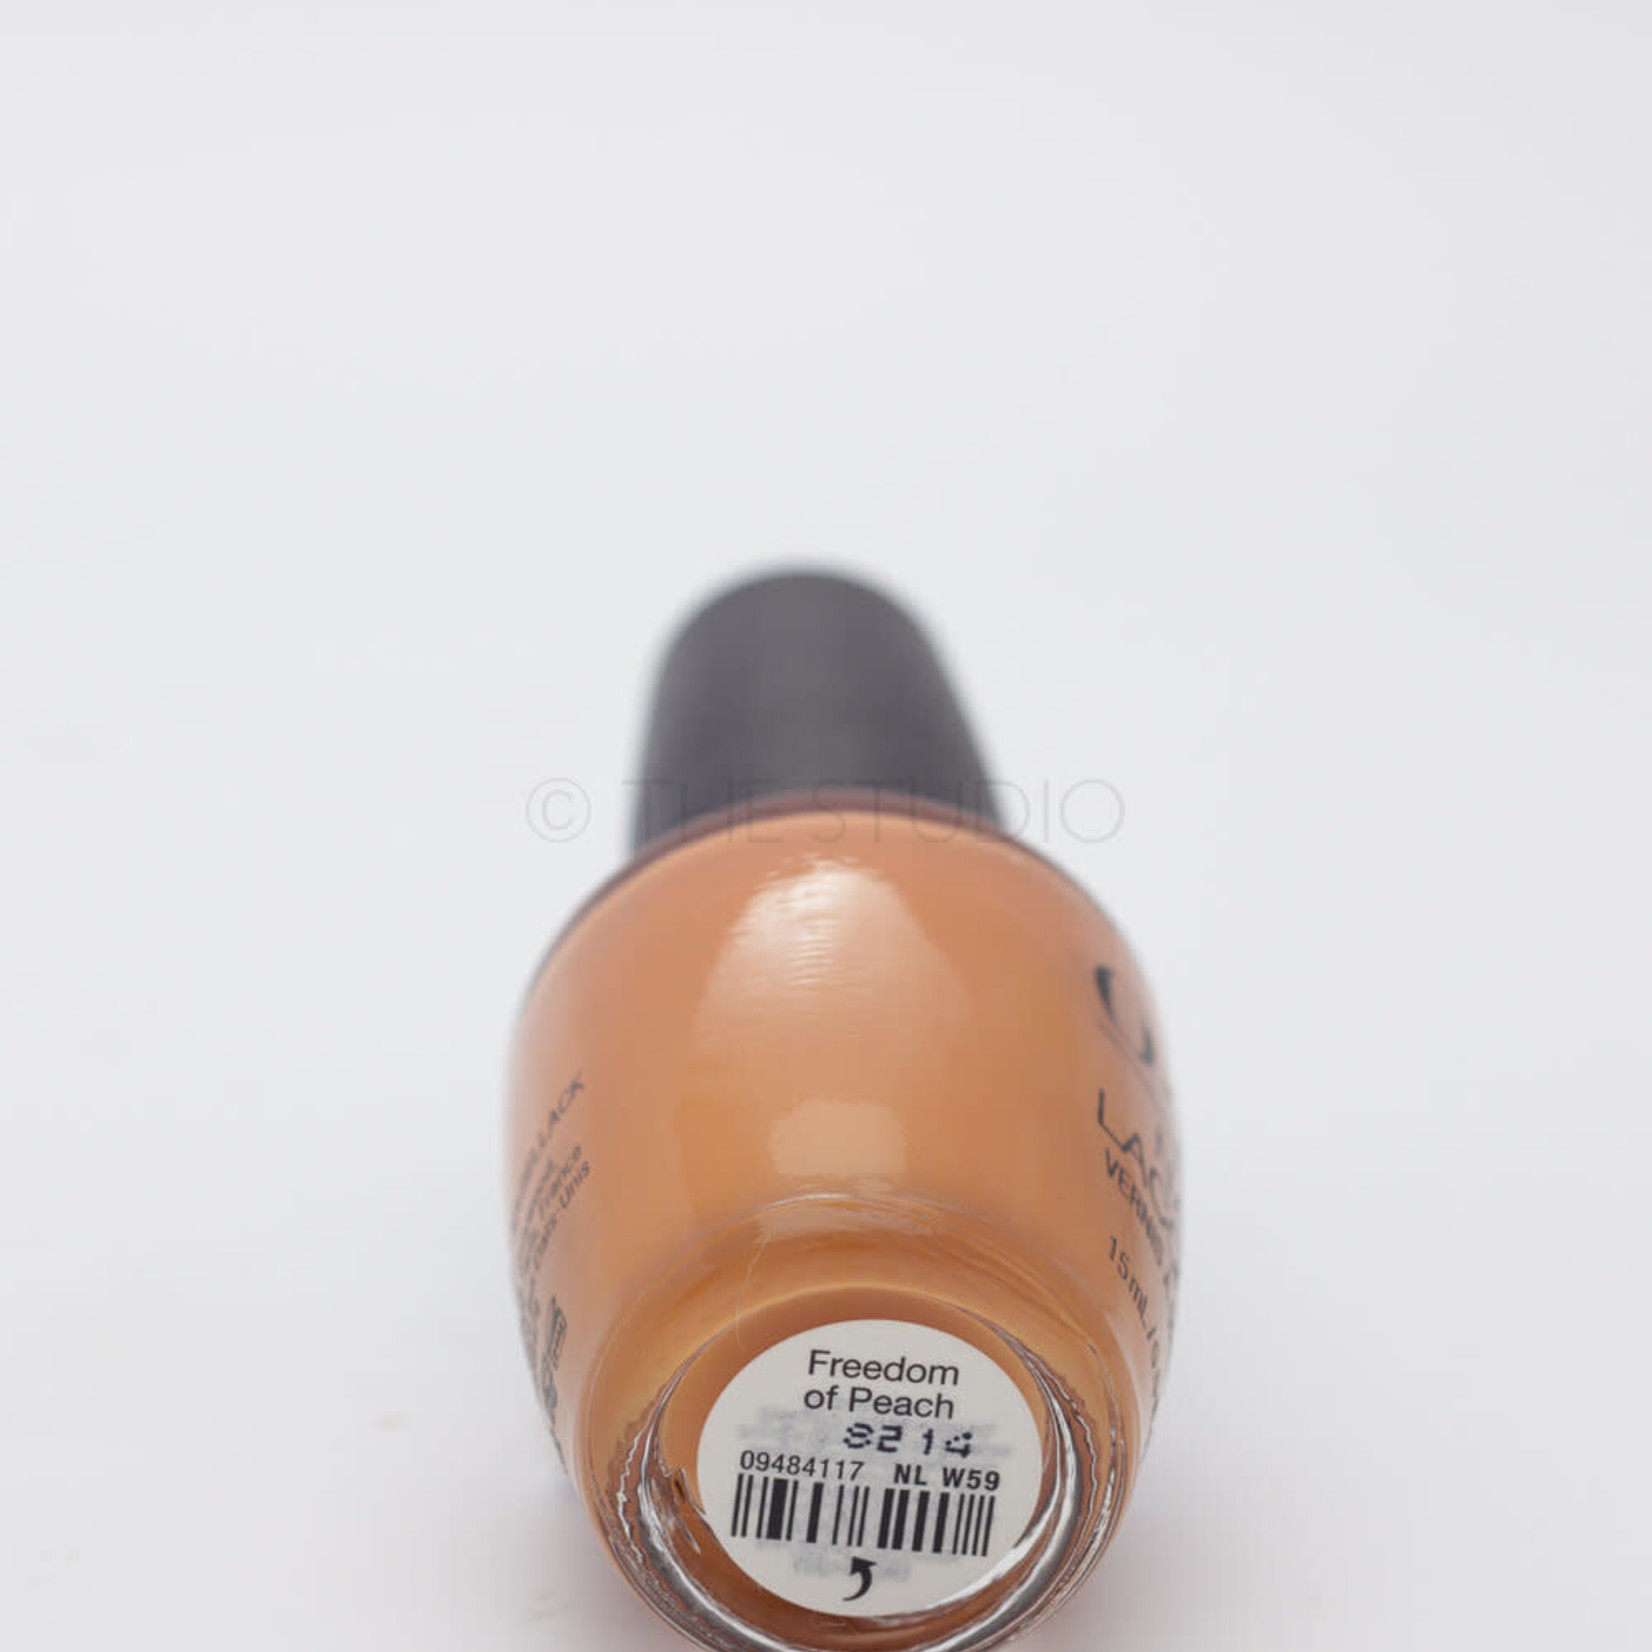 OPI OPI - W59 - Lacquer - Freedom of Peach